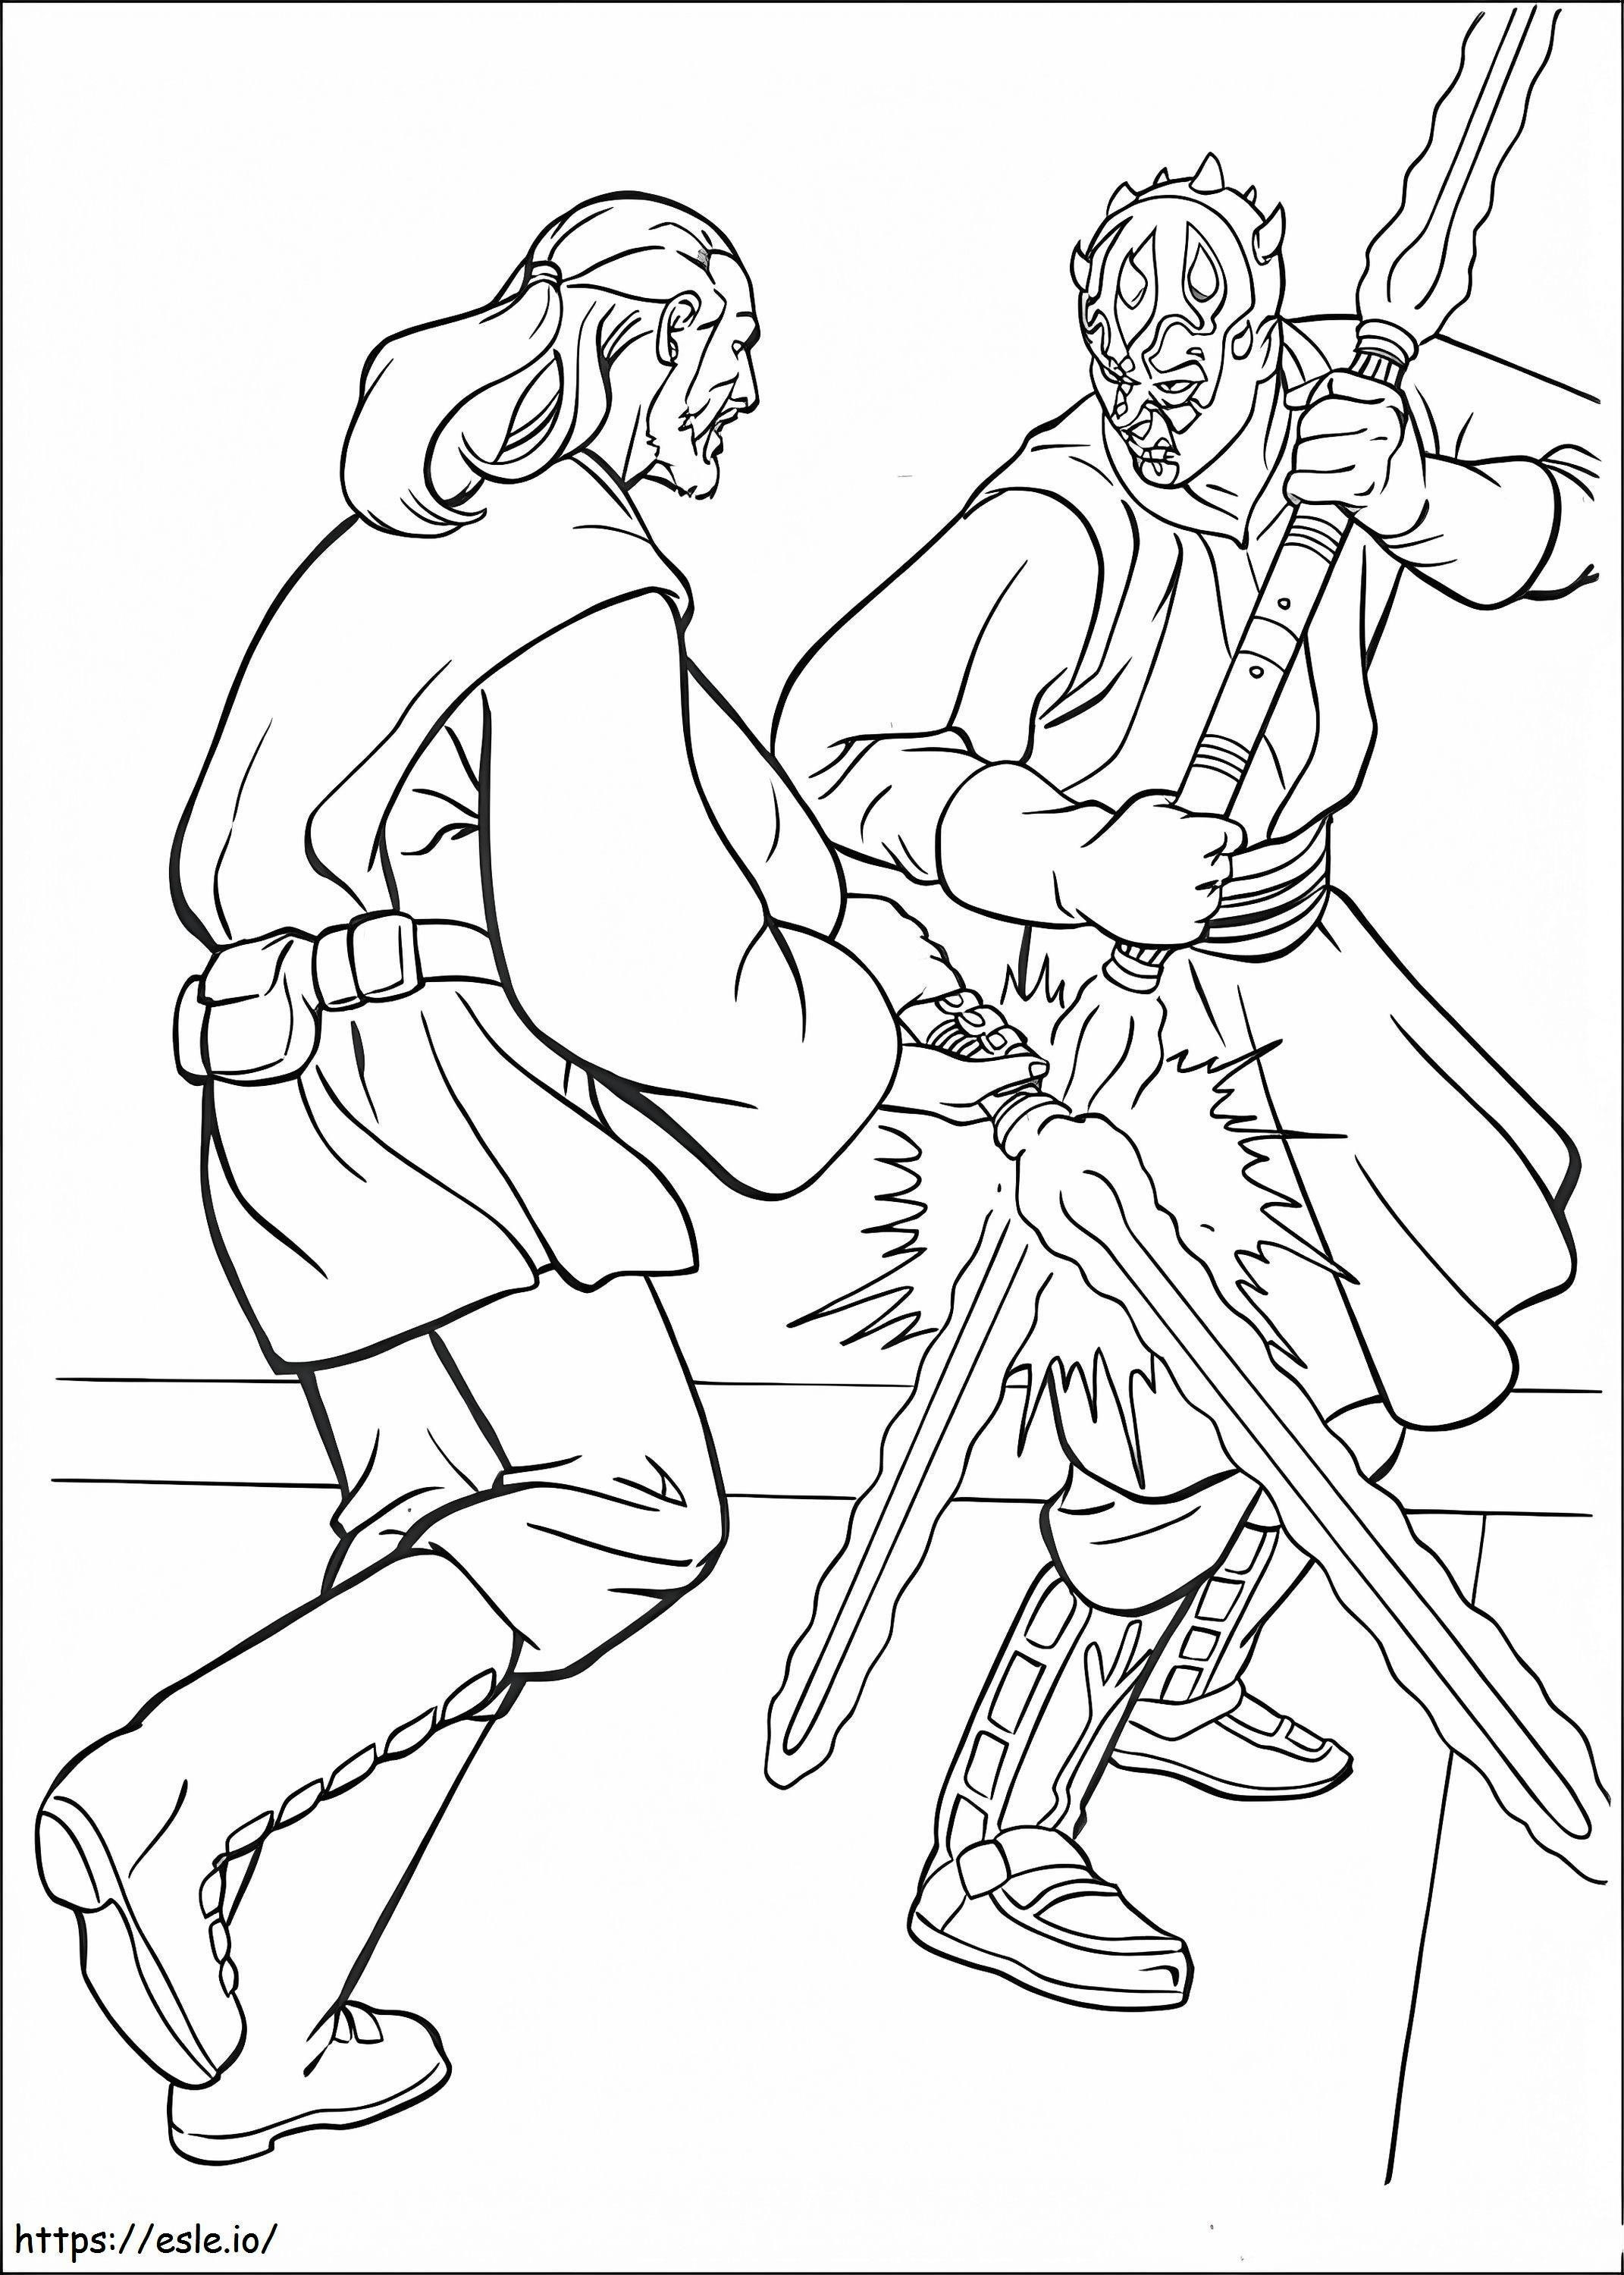 Darth Maul And Qui Gon Jinn coloring page